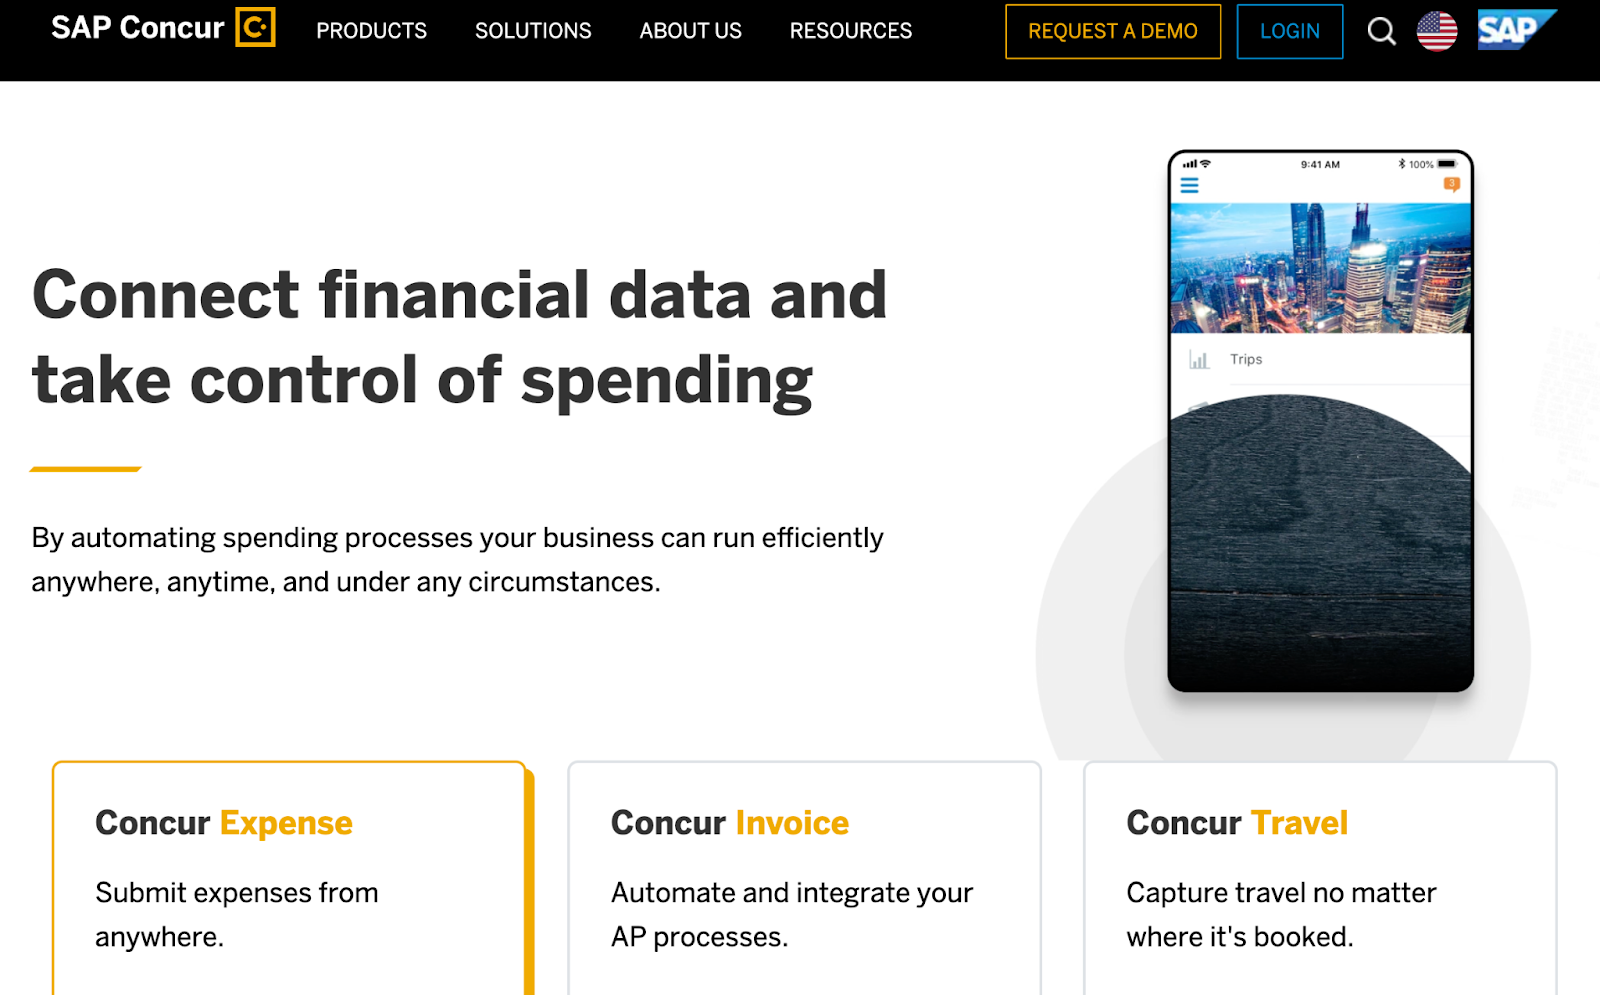 SAP Concur - A tool that integrates travel, expense, and invoice management into one system for total visibility and control